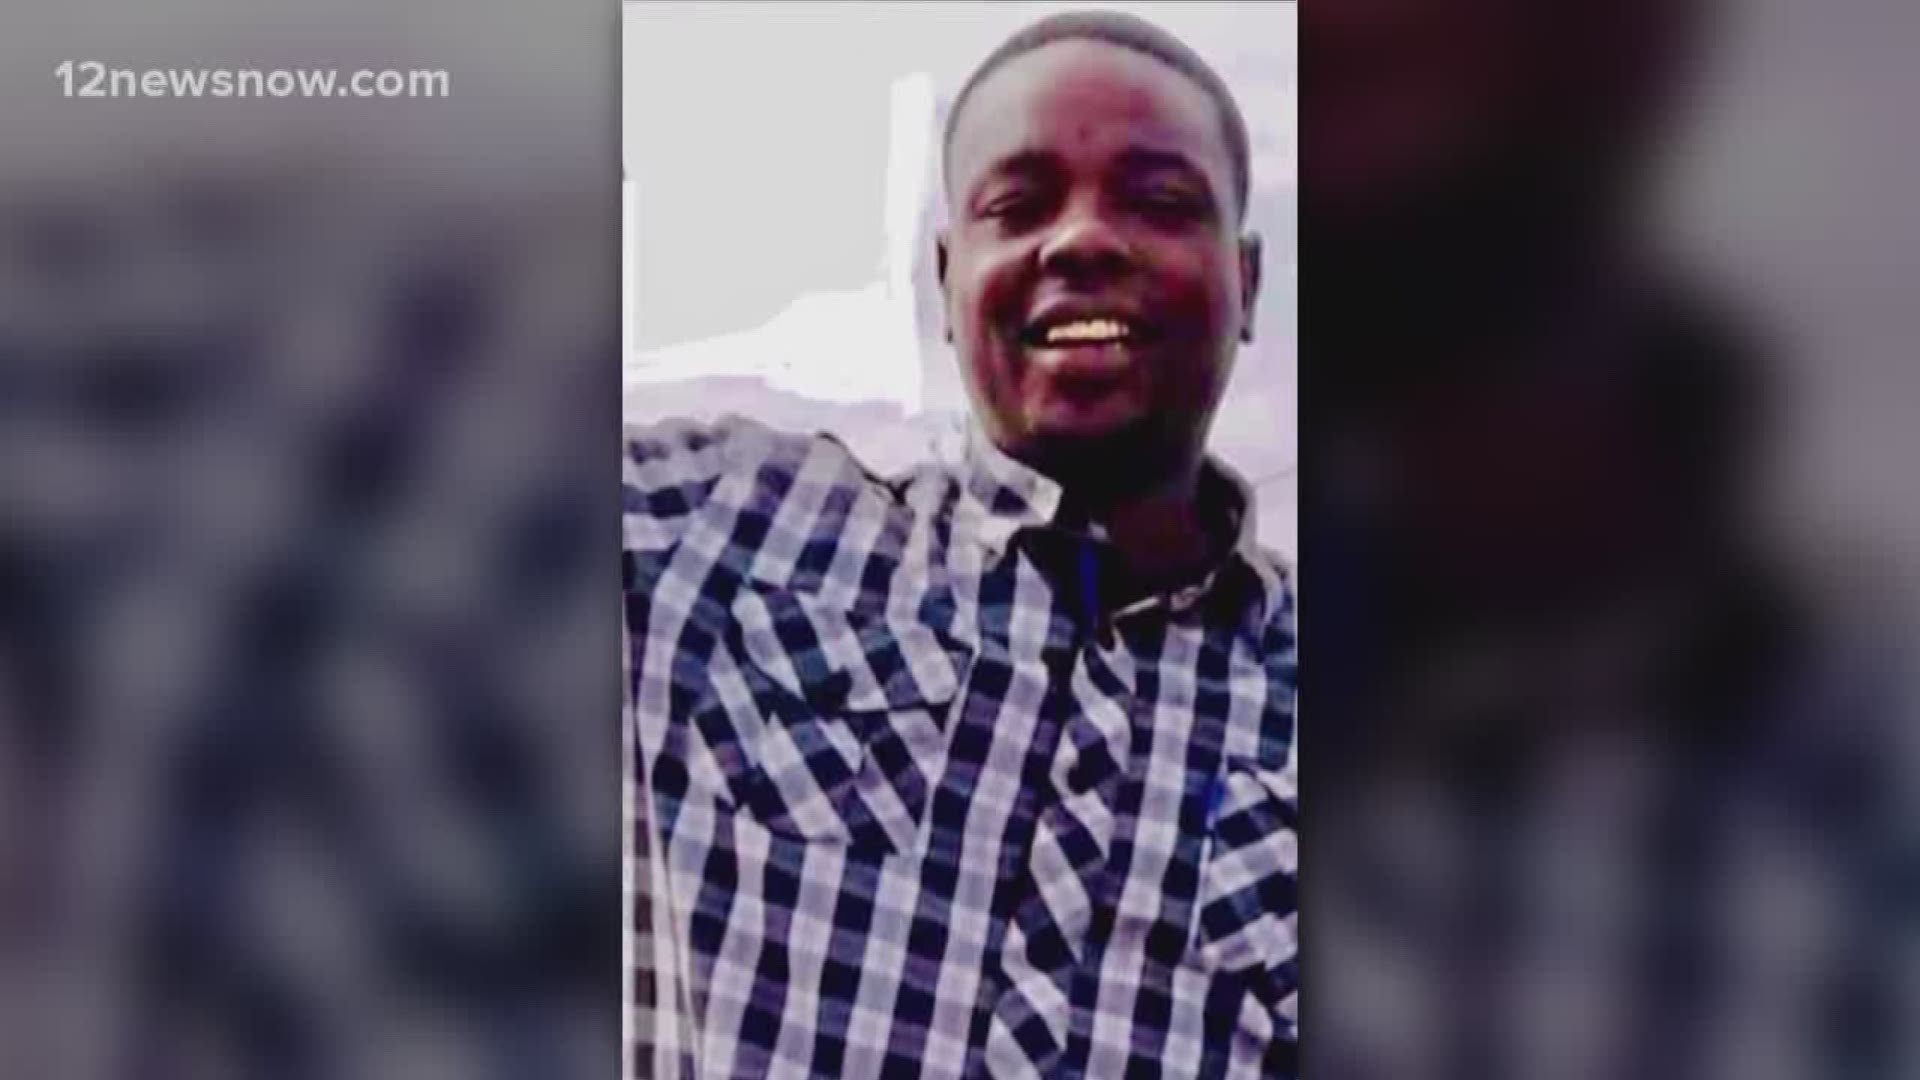 The family Marcus Elam wants justice after his murder.